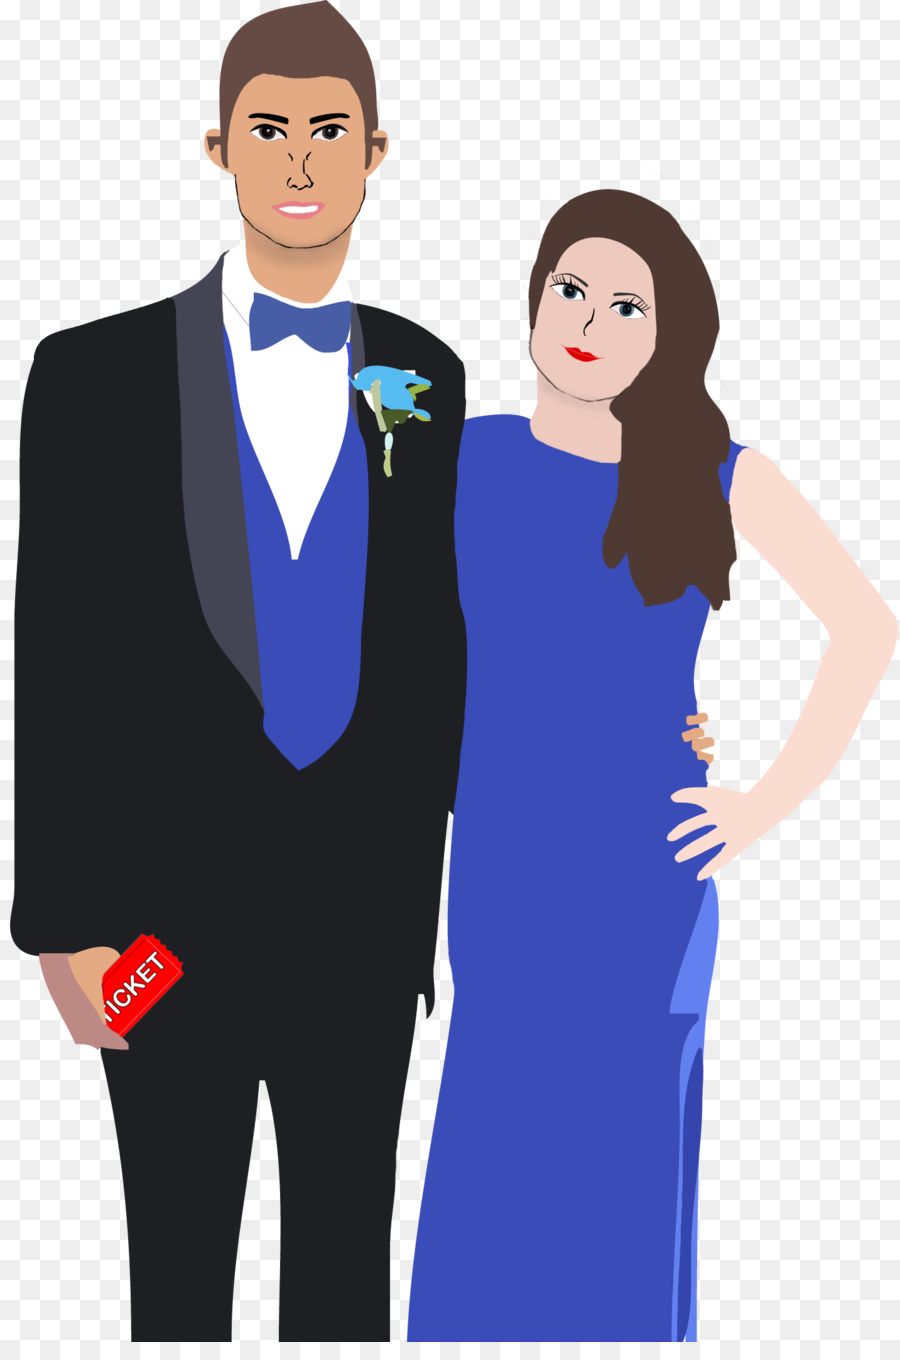 Clip art Prom Portable Network Graphics Dress - Prom clipart png minh bạch